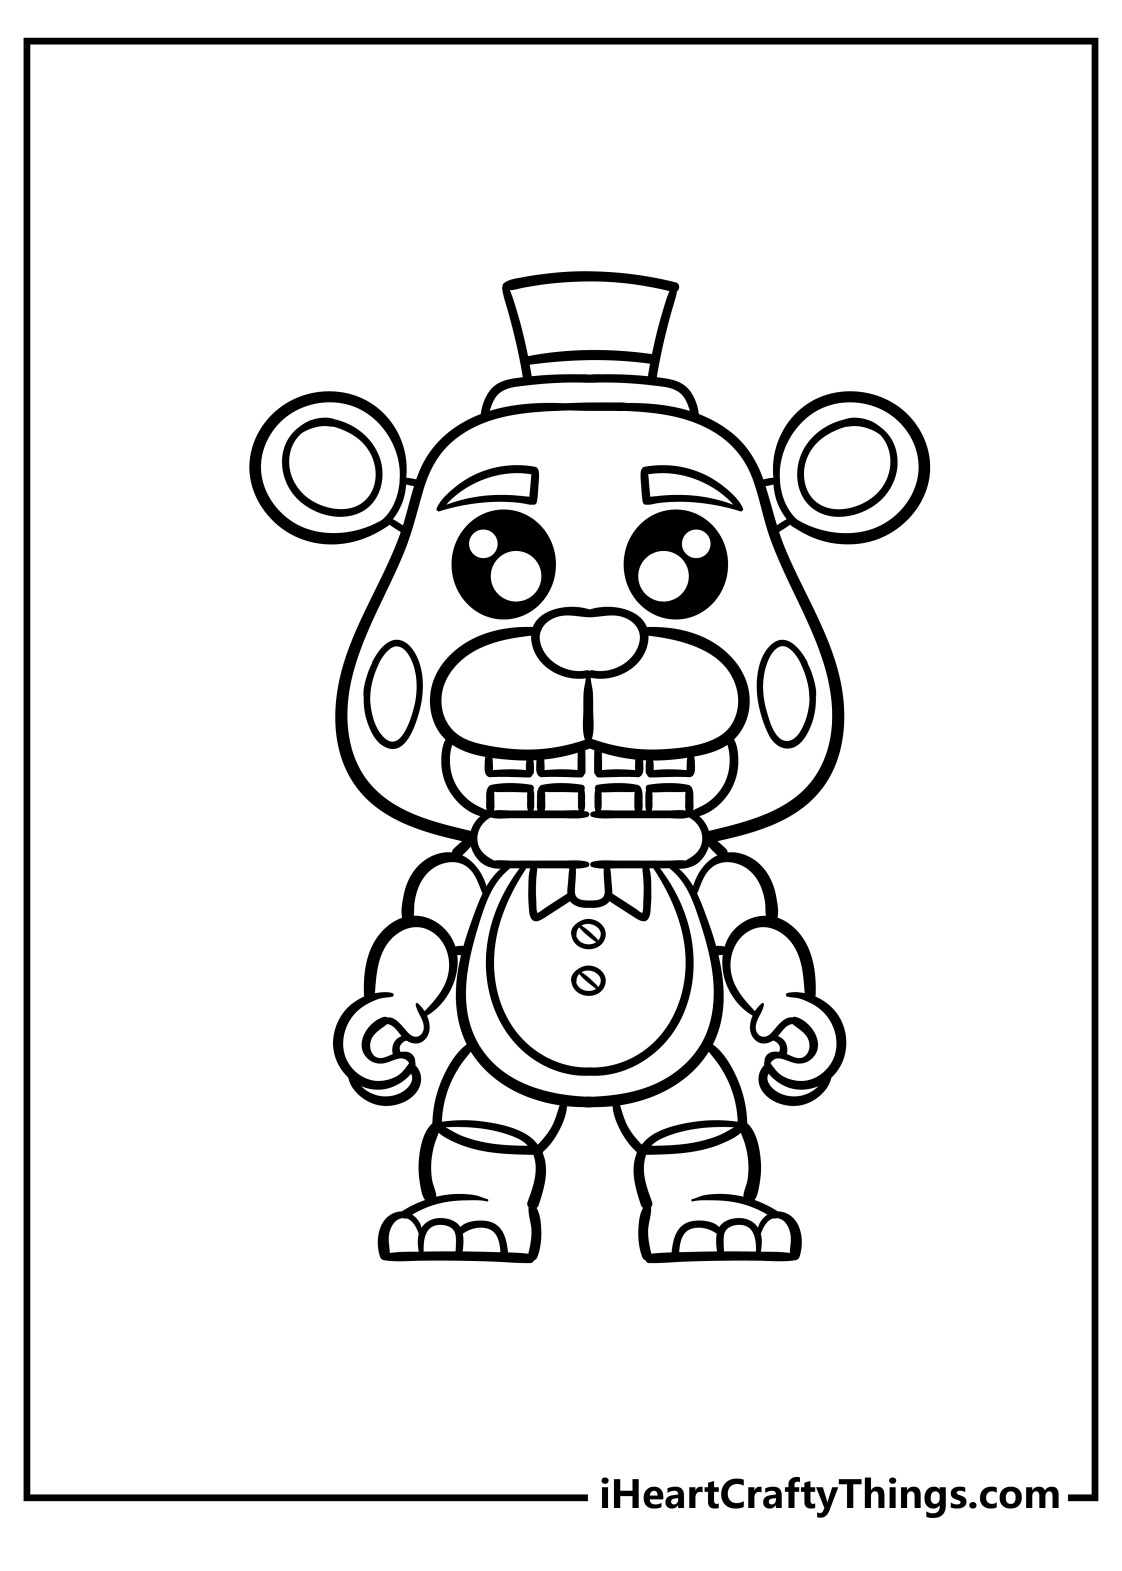 50-best-ideas-for-coloring-freddy-fazbear-images-rezfoods-resep